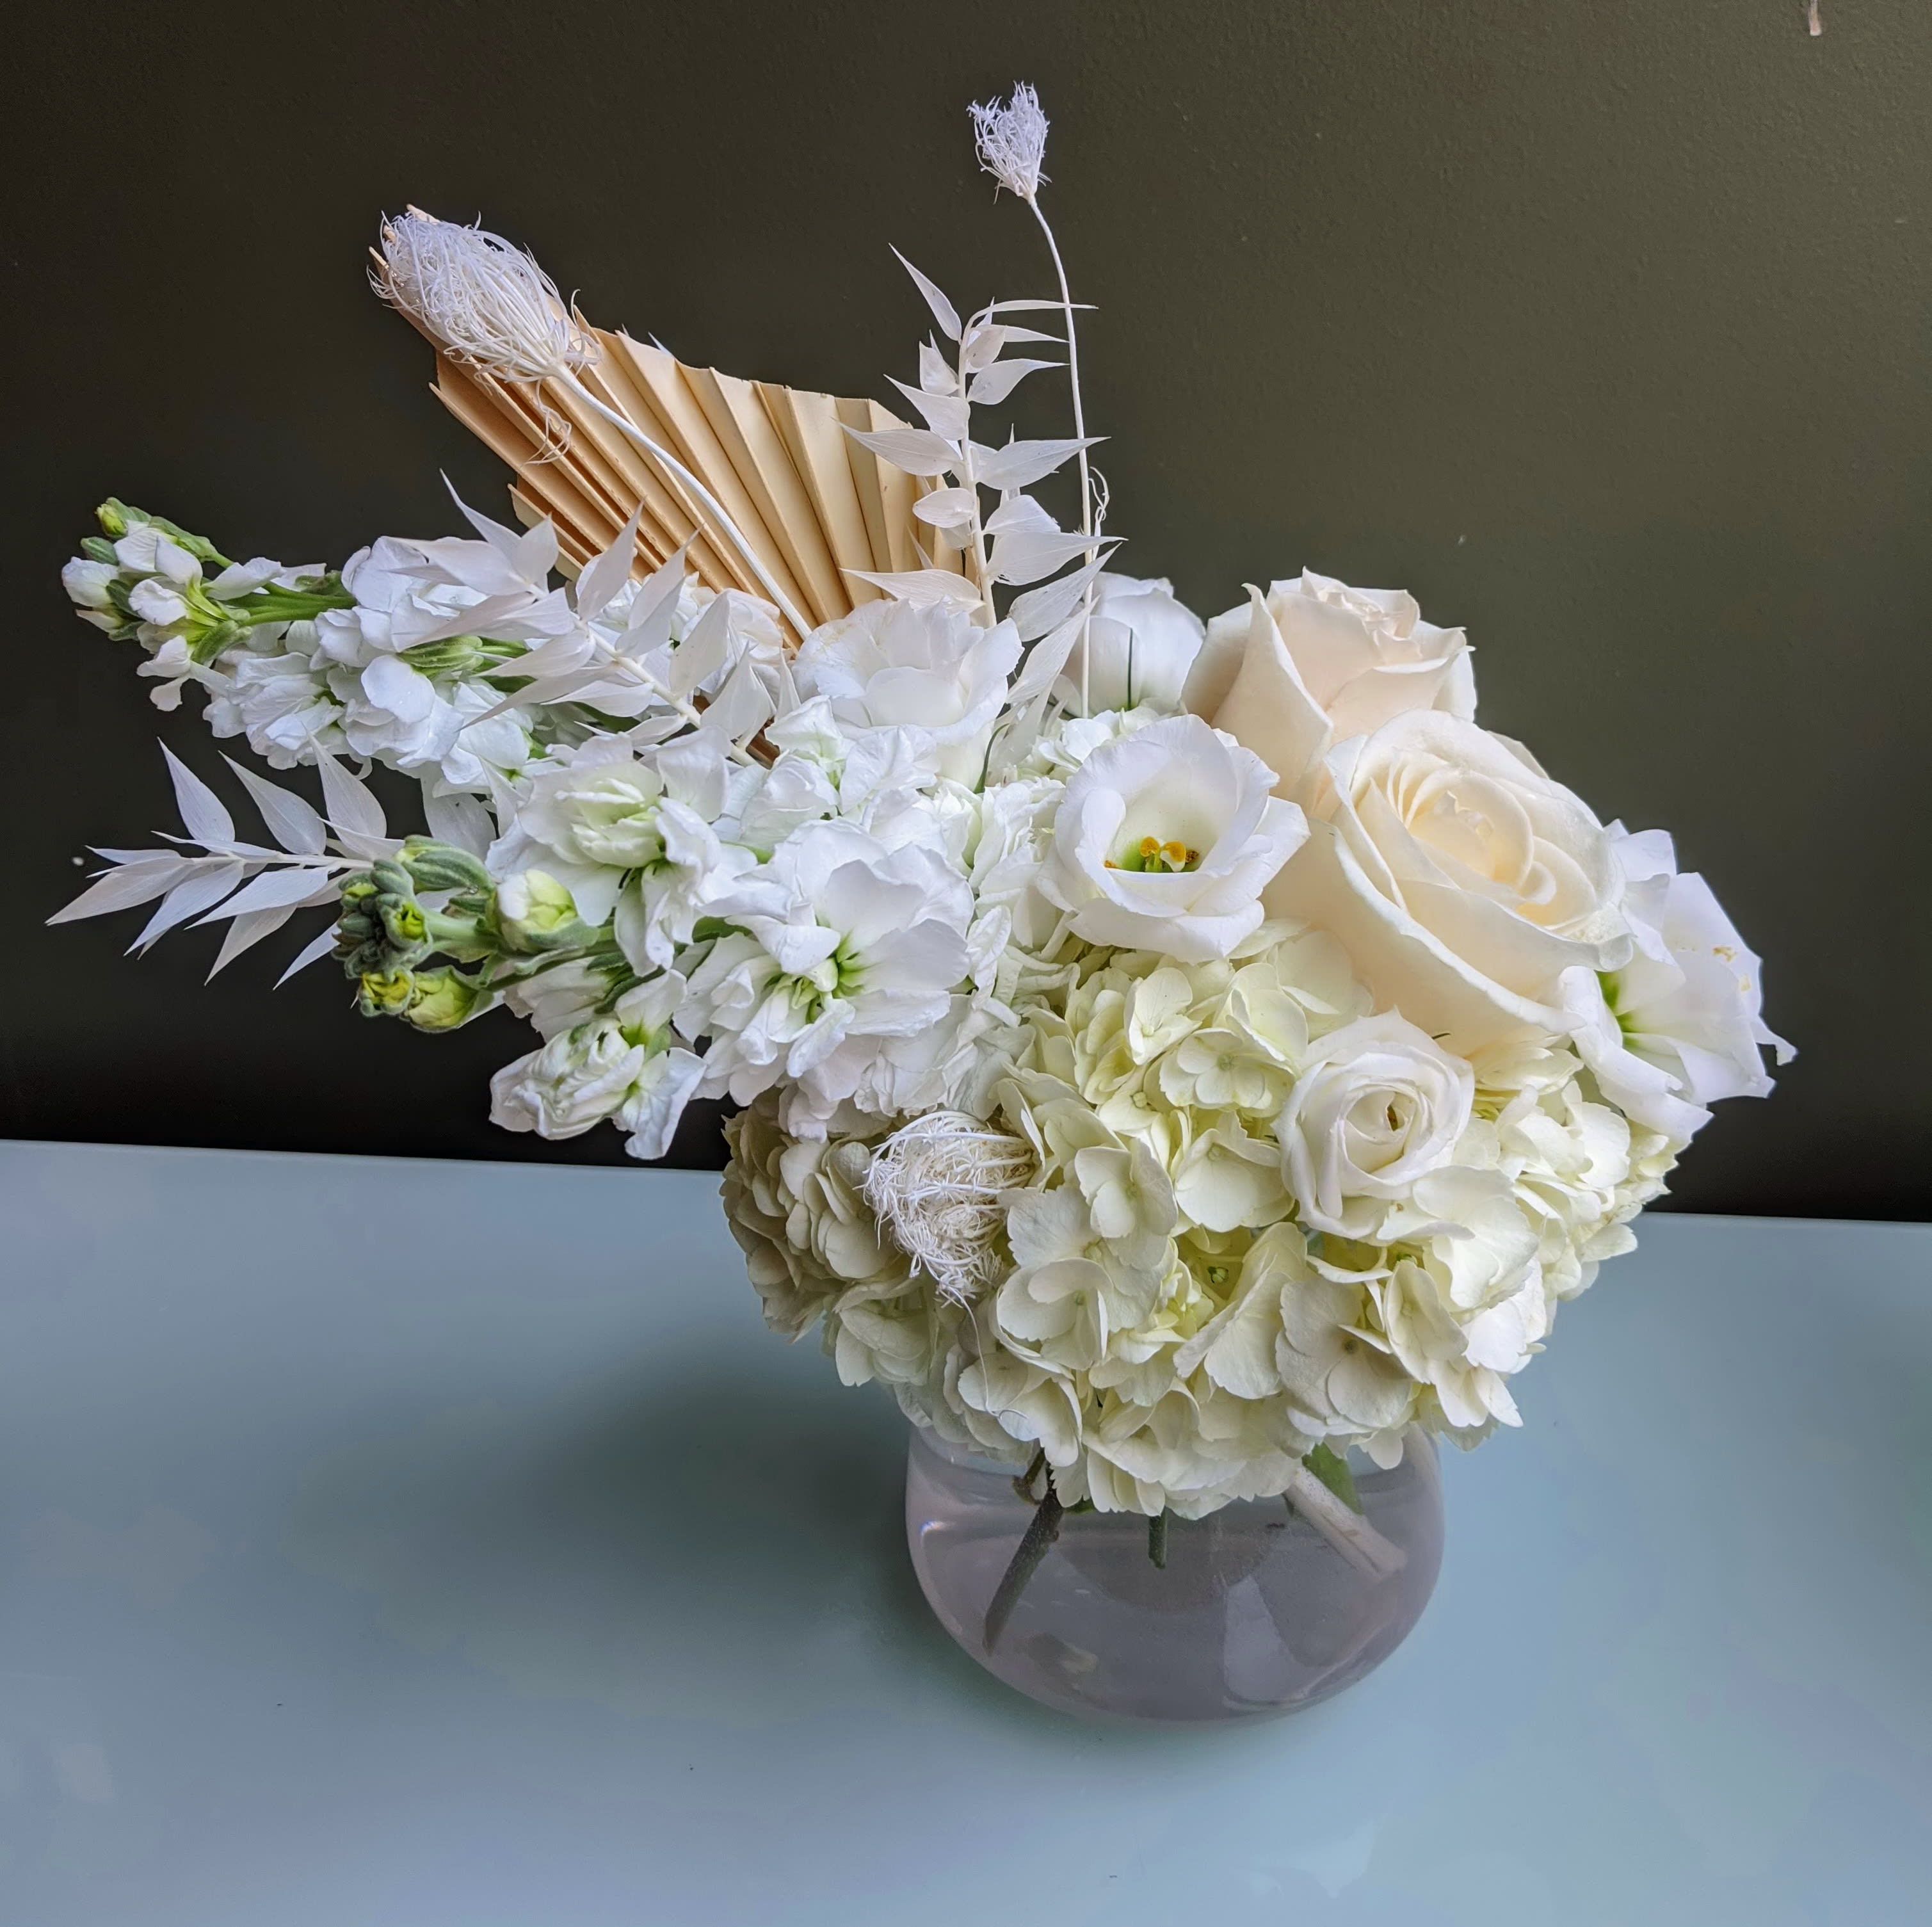 Creamy Dreamy Boho - This petit arrangement features roses, hydrangea or other white or creamy flowers, in a feminine vase, with fragrant white stock, and bleached and preserved flowers such as ruscus, bunny tails, or thistle.  